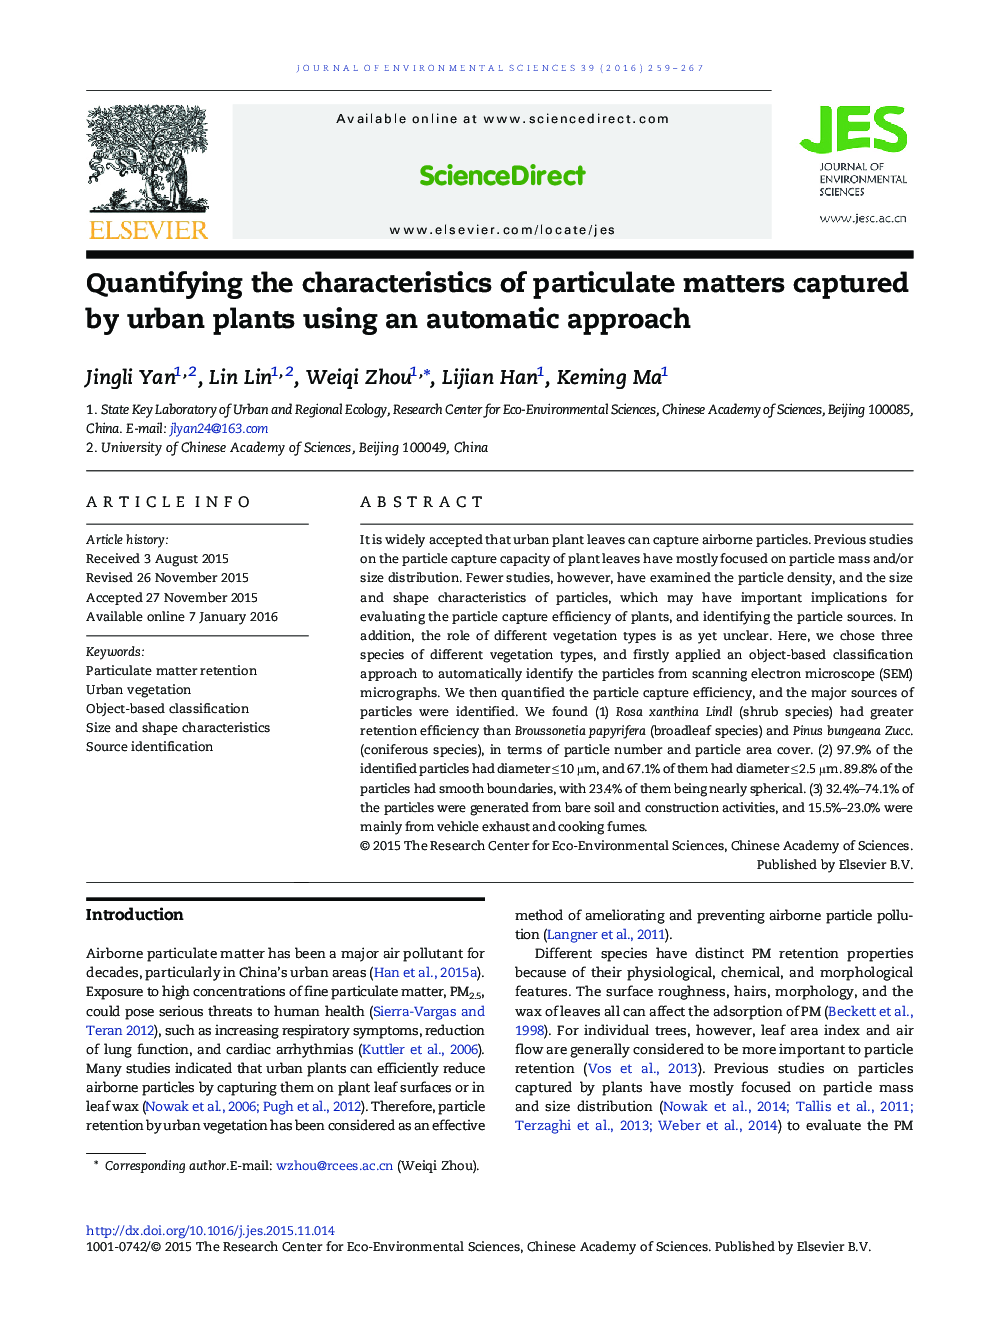 Quantifying the characteristics of particulate matters captured by urban plants using an automatic approach